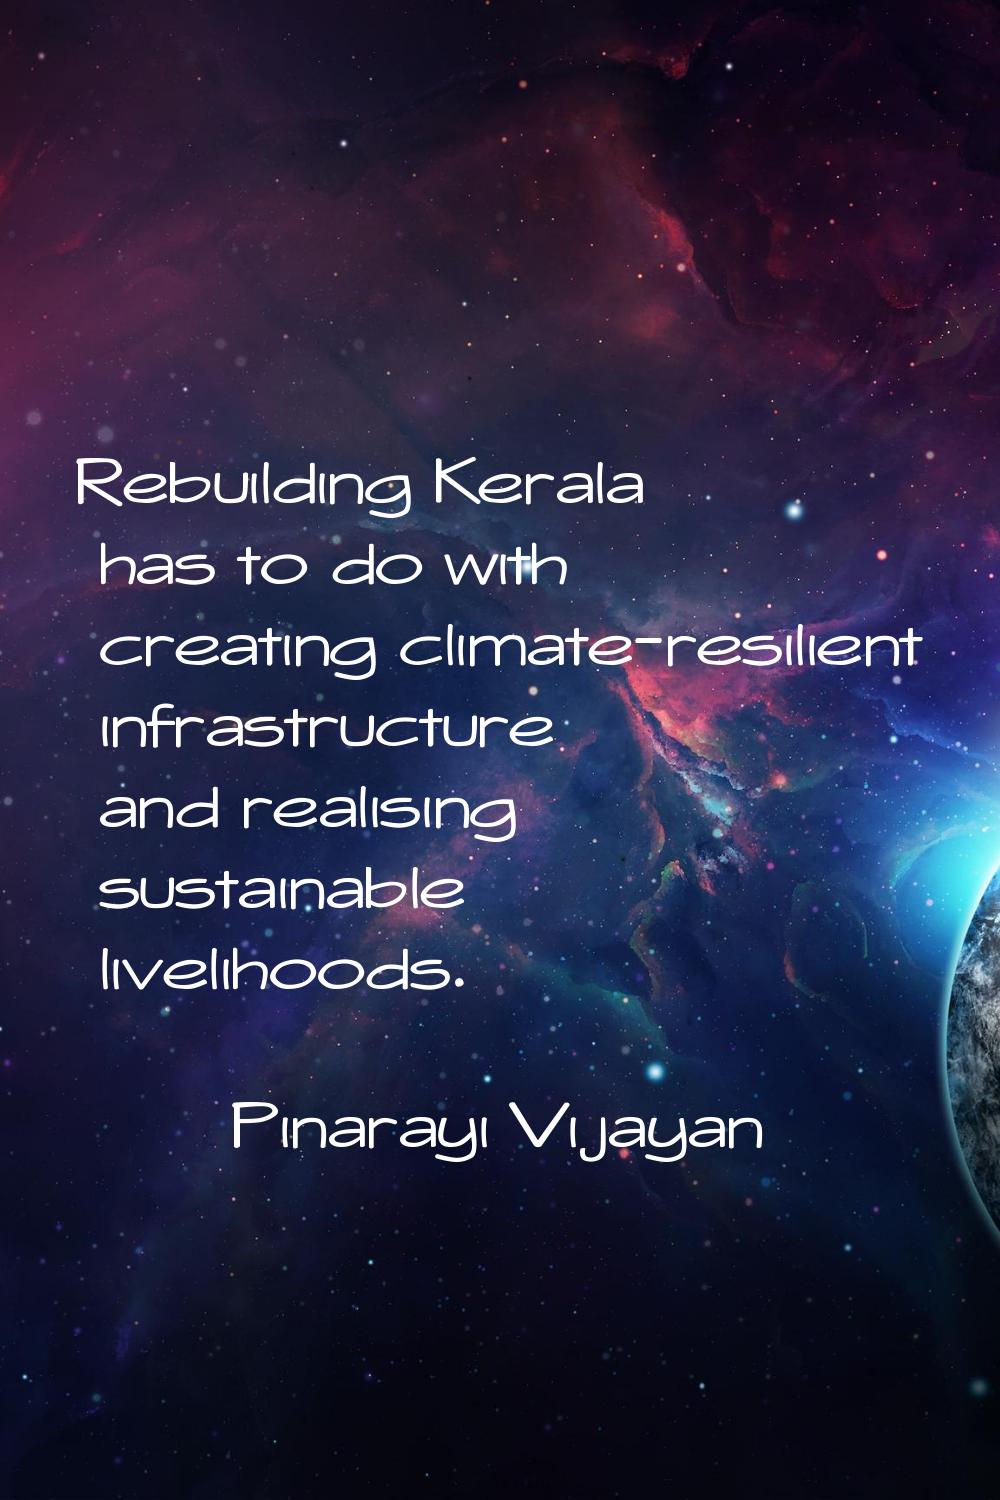 Rebuilding Kerala has to do with creating climate-resilient infrastructure and realising sustainabl